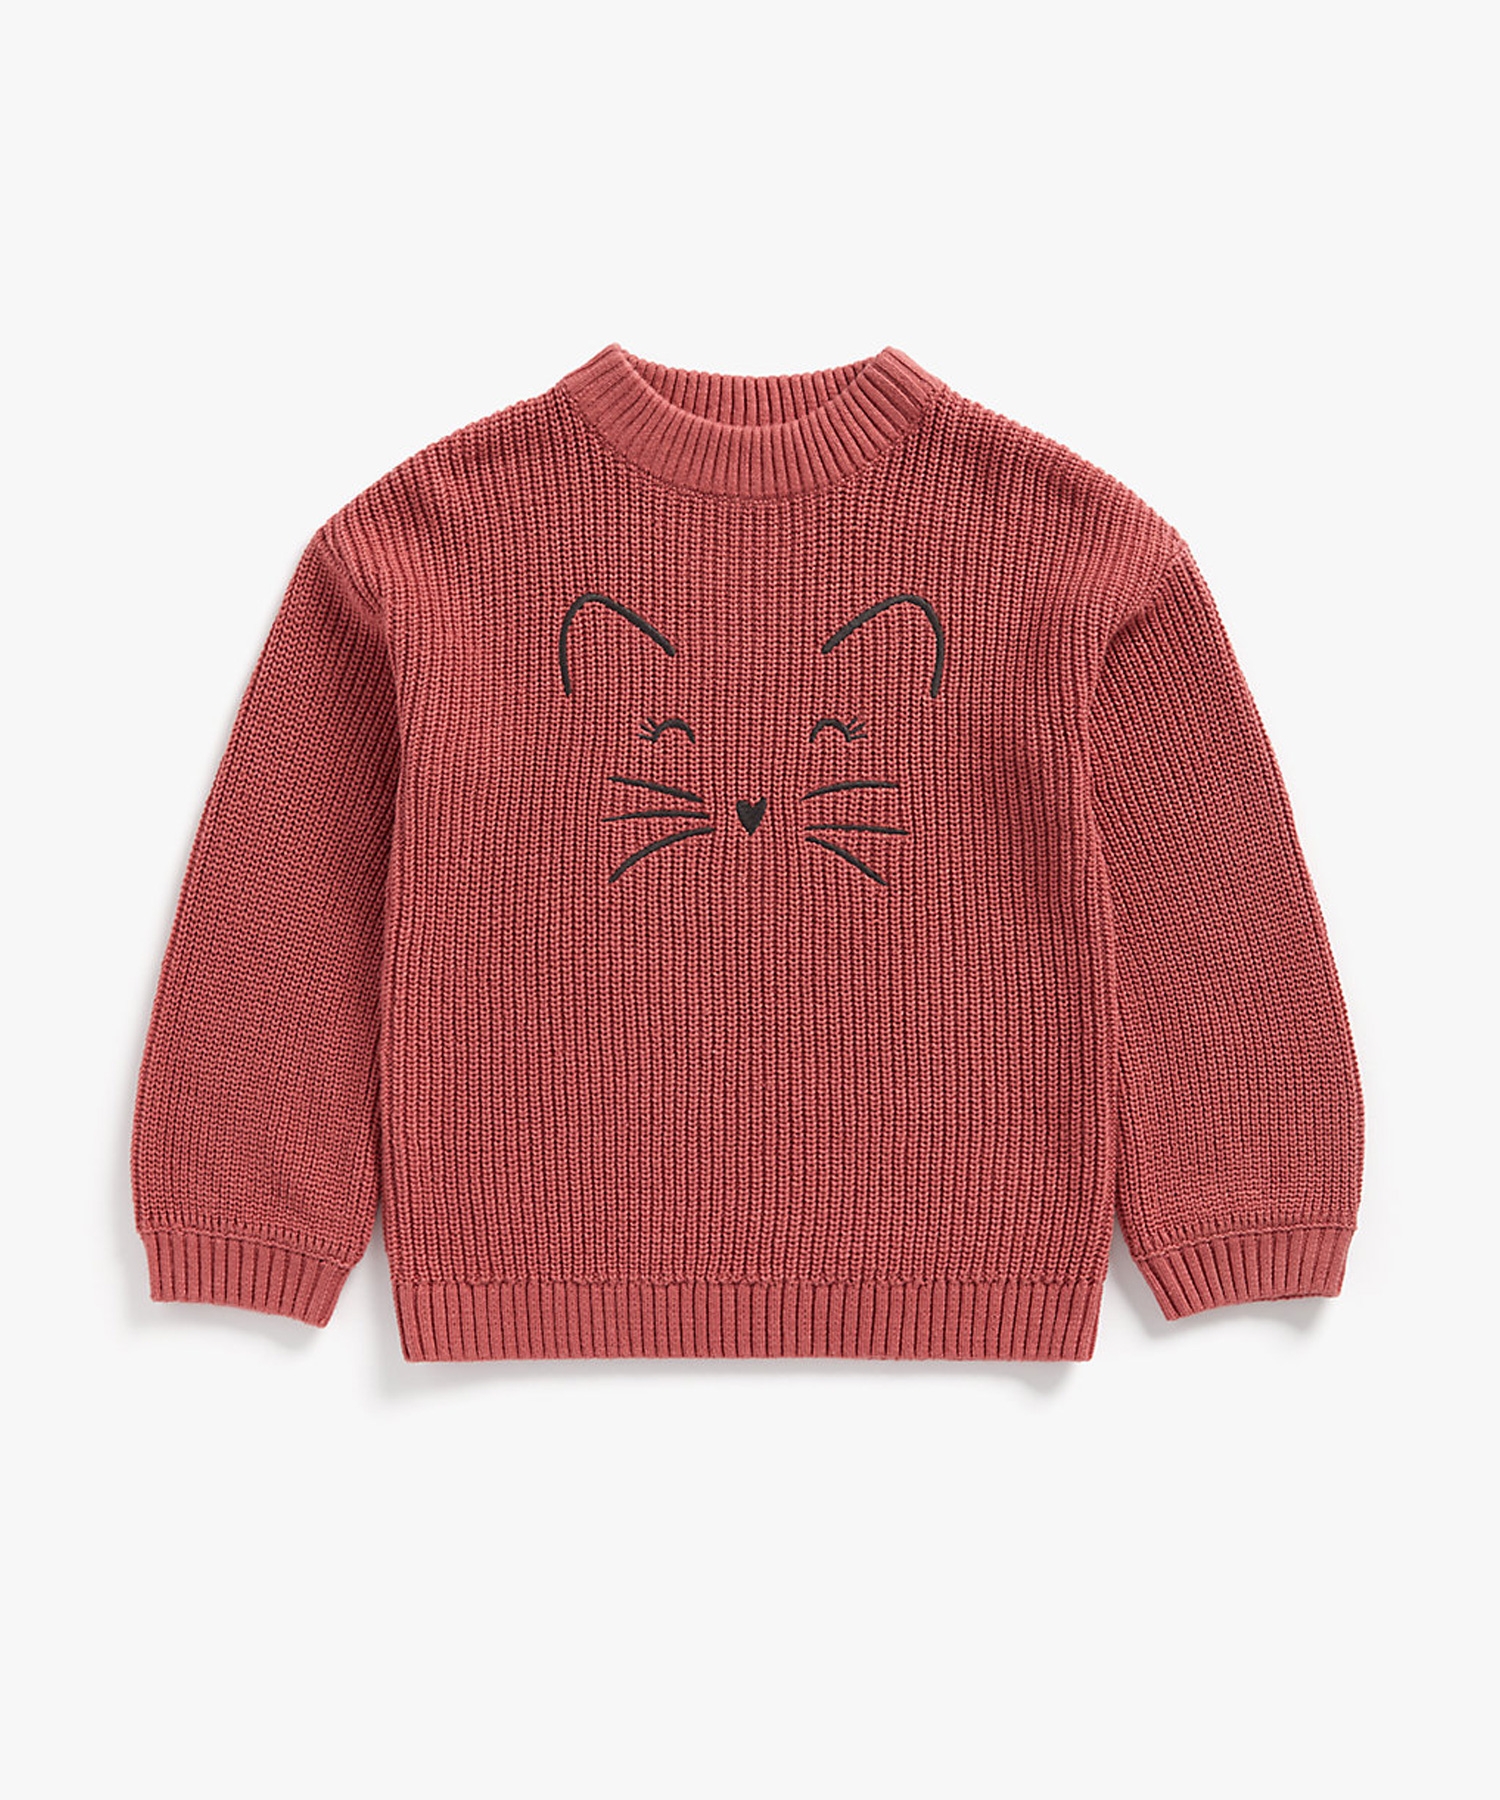 Mothercare | Girls Full Sleeves Sweater Cat Embroidery - Pink